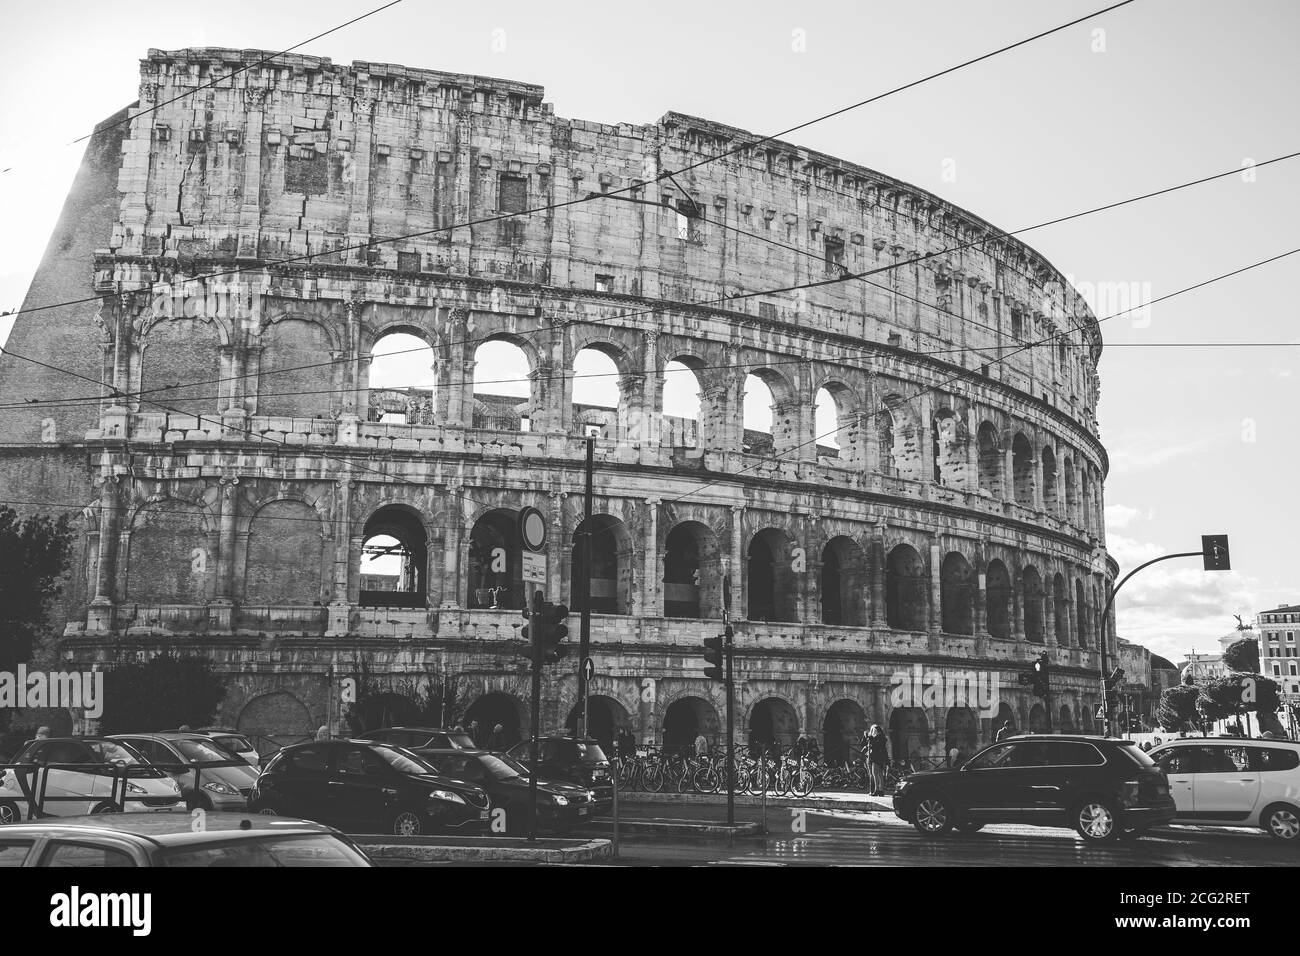 Black and white image of Colosseum against sky with traffic junction and cars in the foreground at Rome Stock Photo